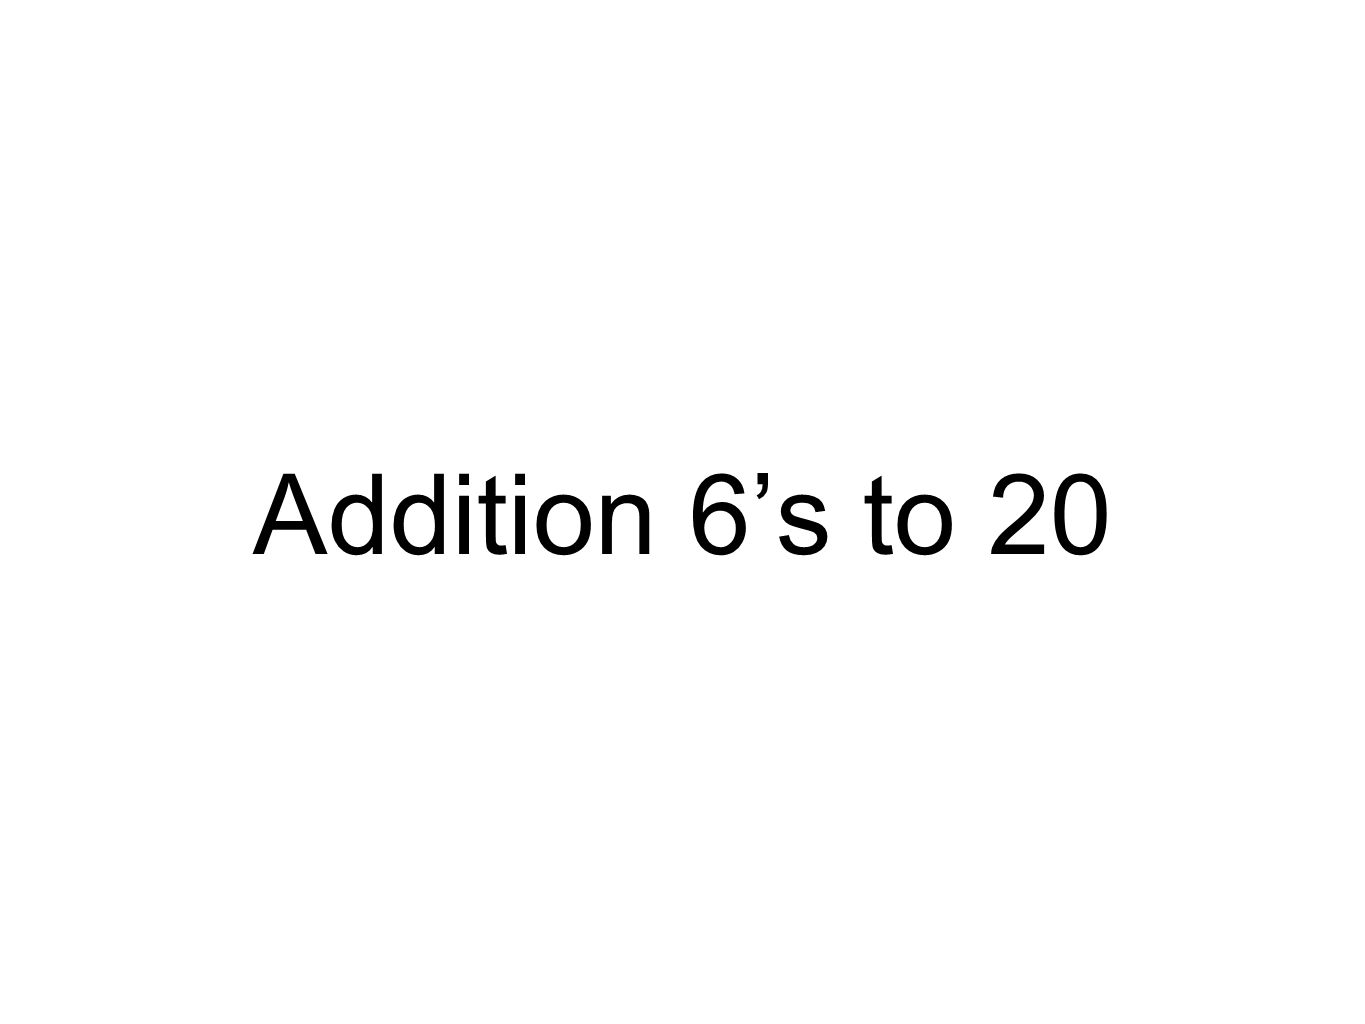 Addition 6’s to 20